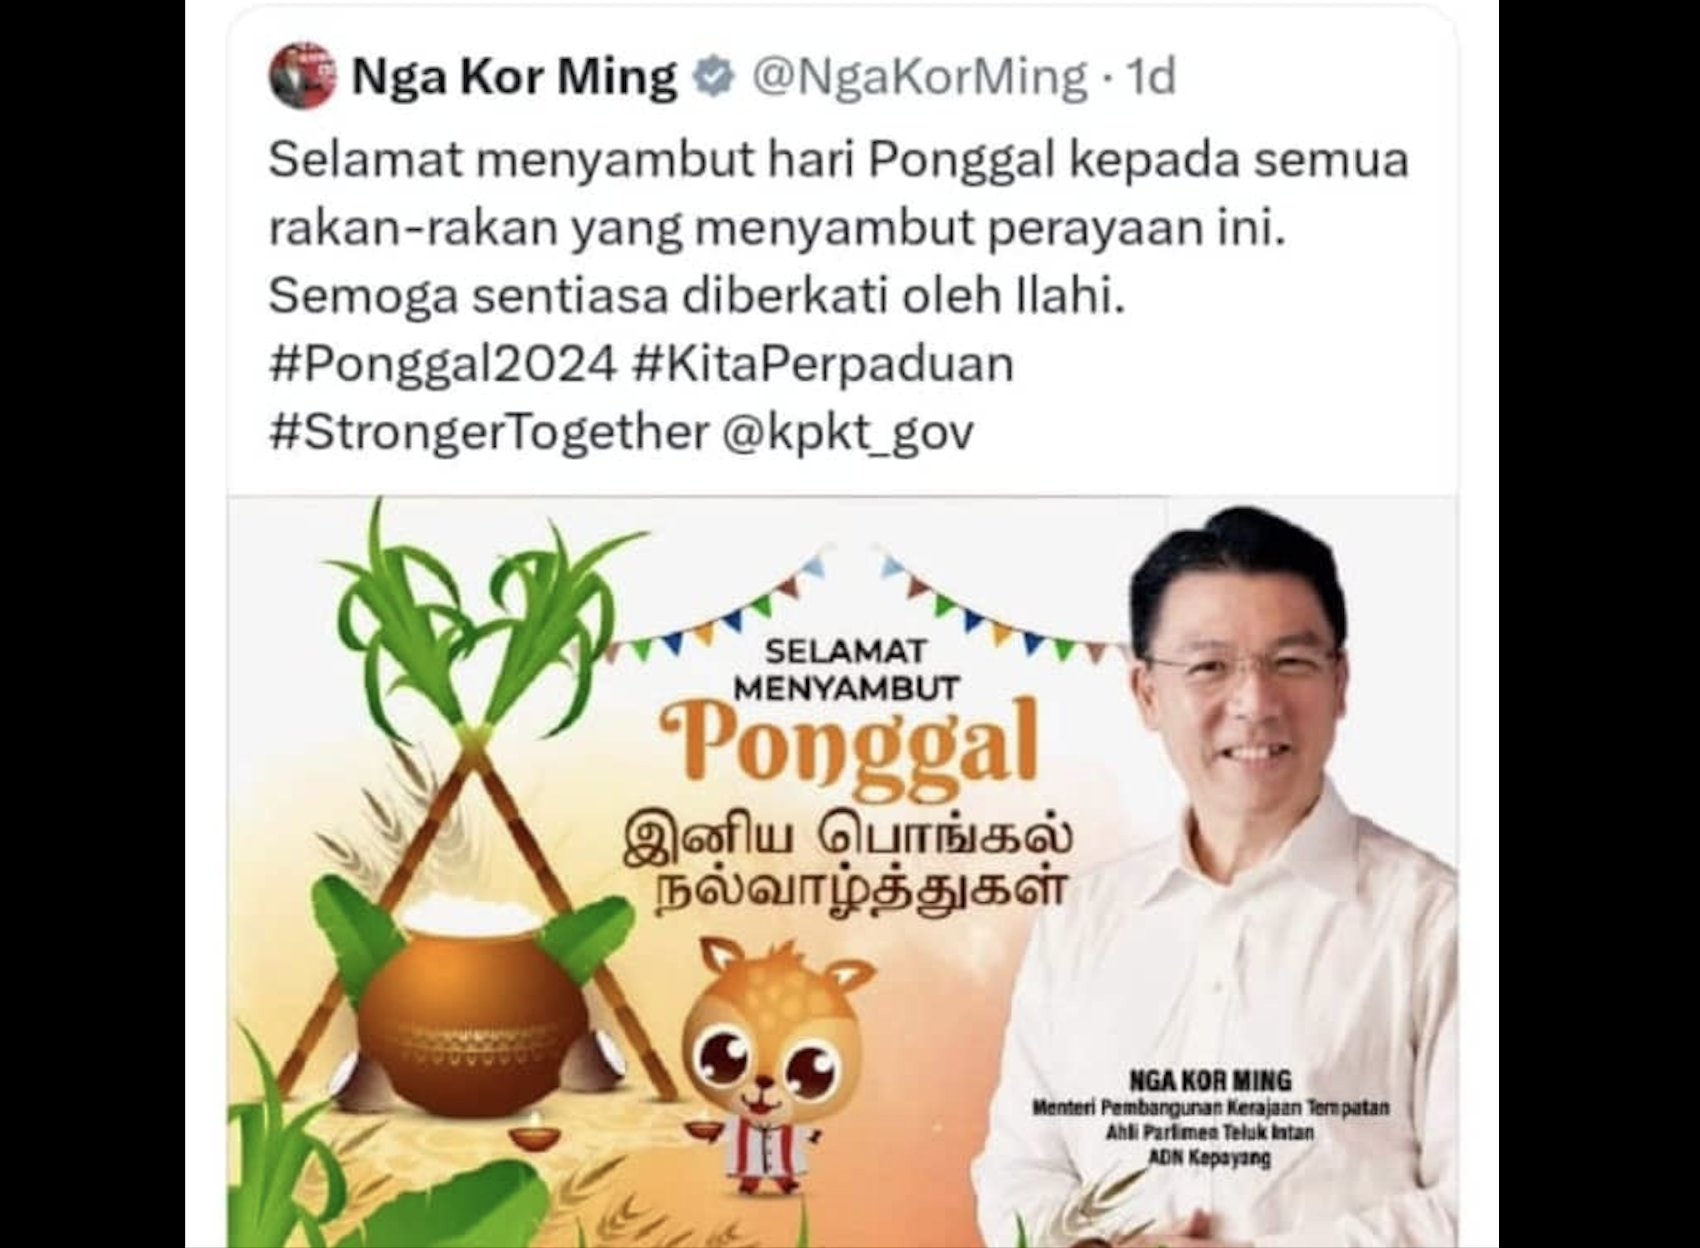 Nga’s Pongal wishes slammed by netizens for use of ‘Ilahi’, post deleted soon after